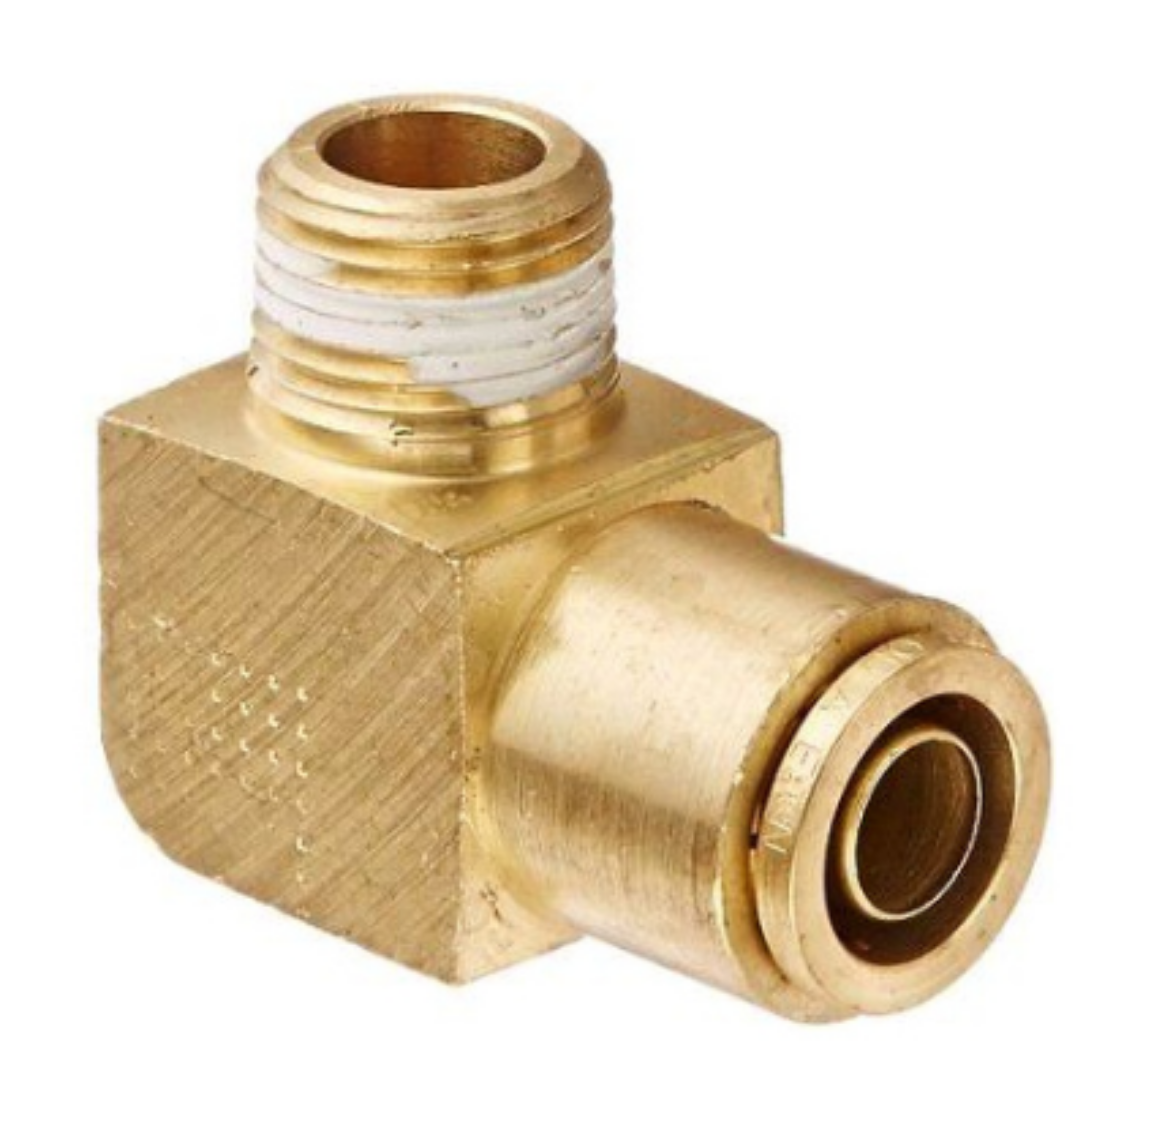 Picture of 1869-4-4 1/4'x1/4' NPT MALE 90' ELBOW AIR BRAKE